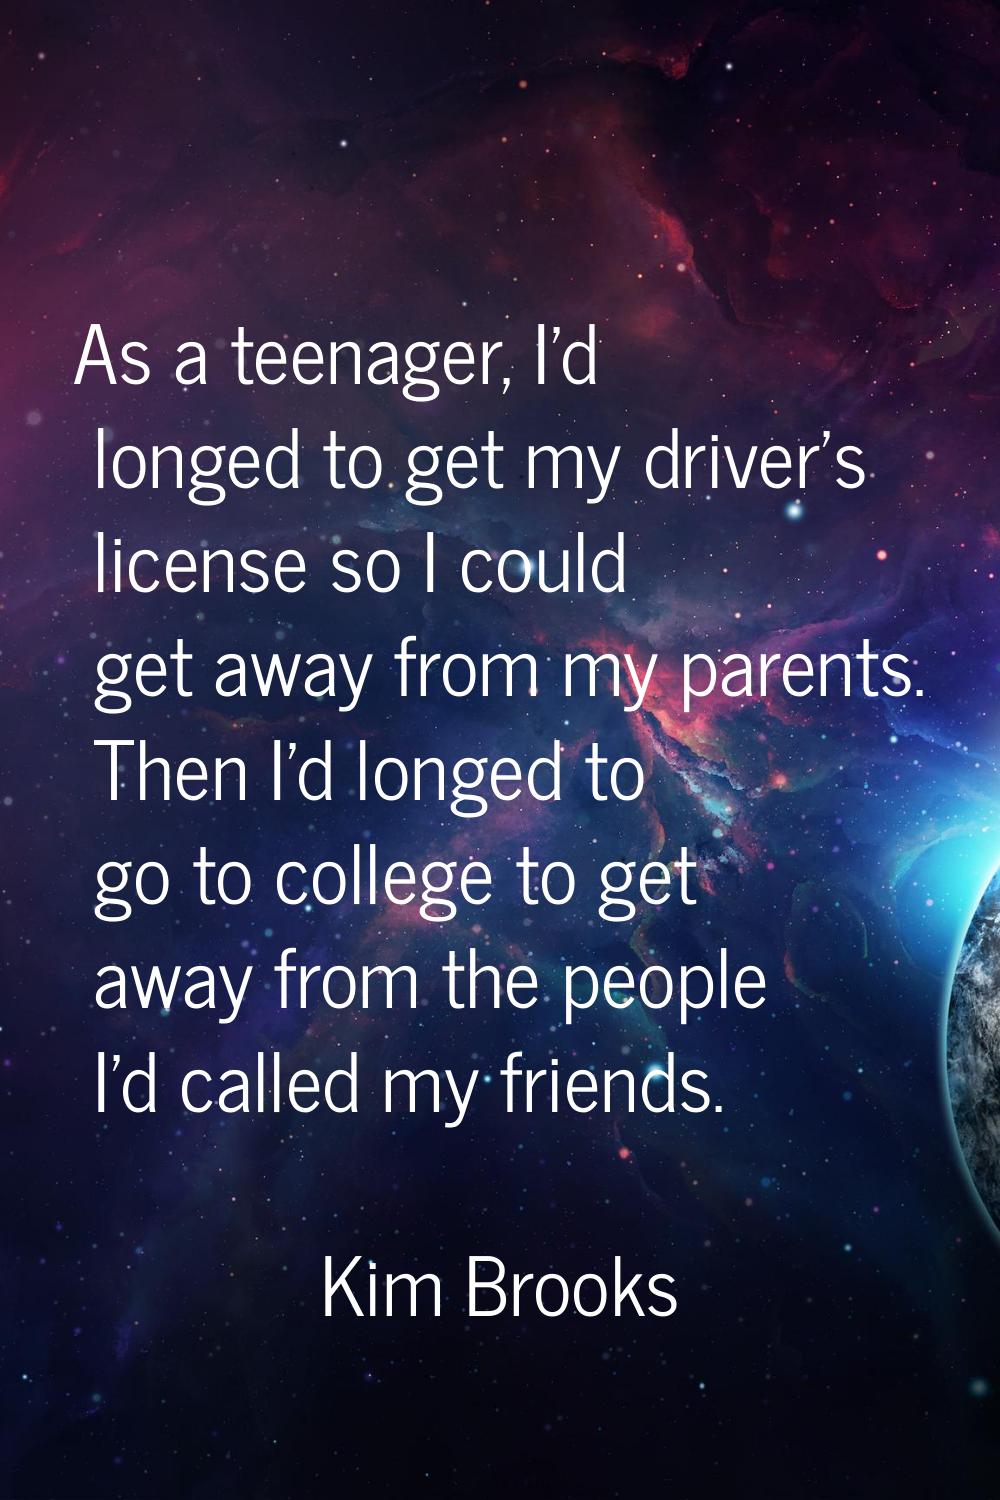 As a teenager, I'd longed to get my driver's license so I could get away from my parents. Then I'd 